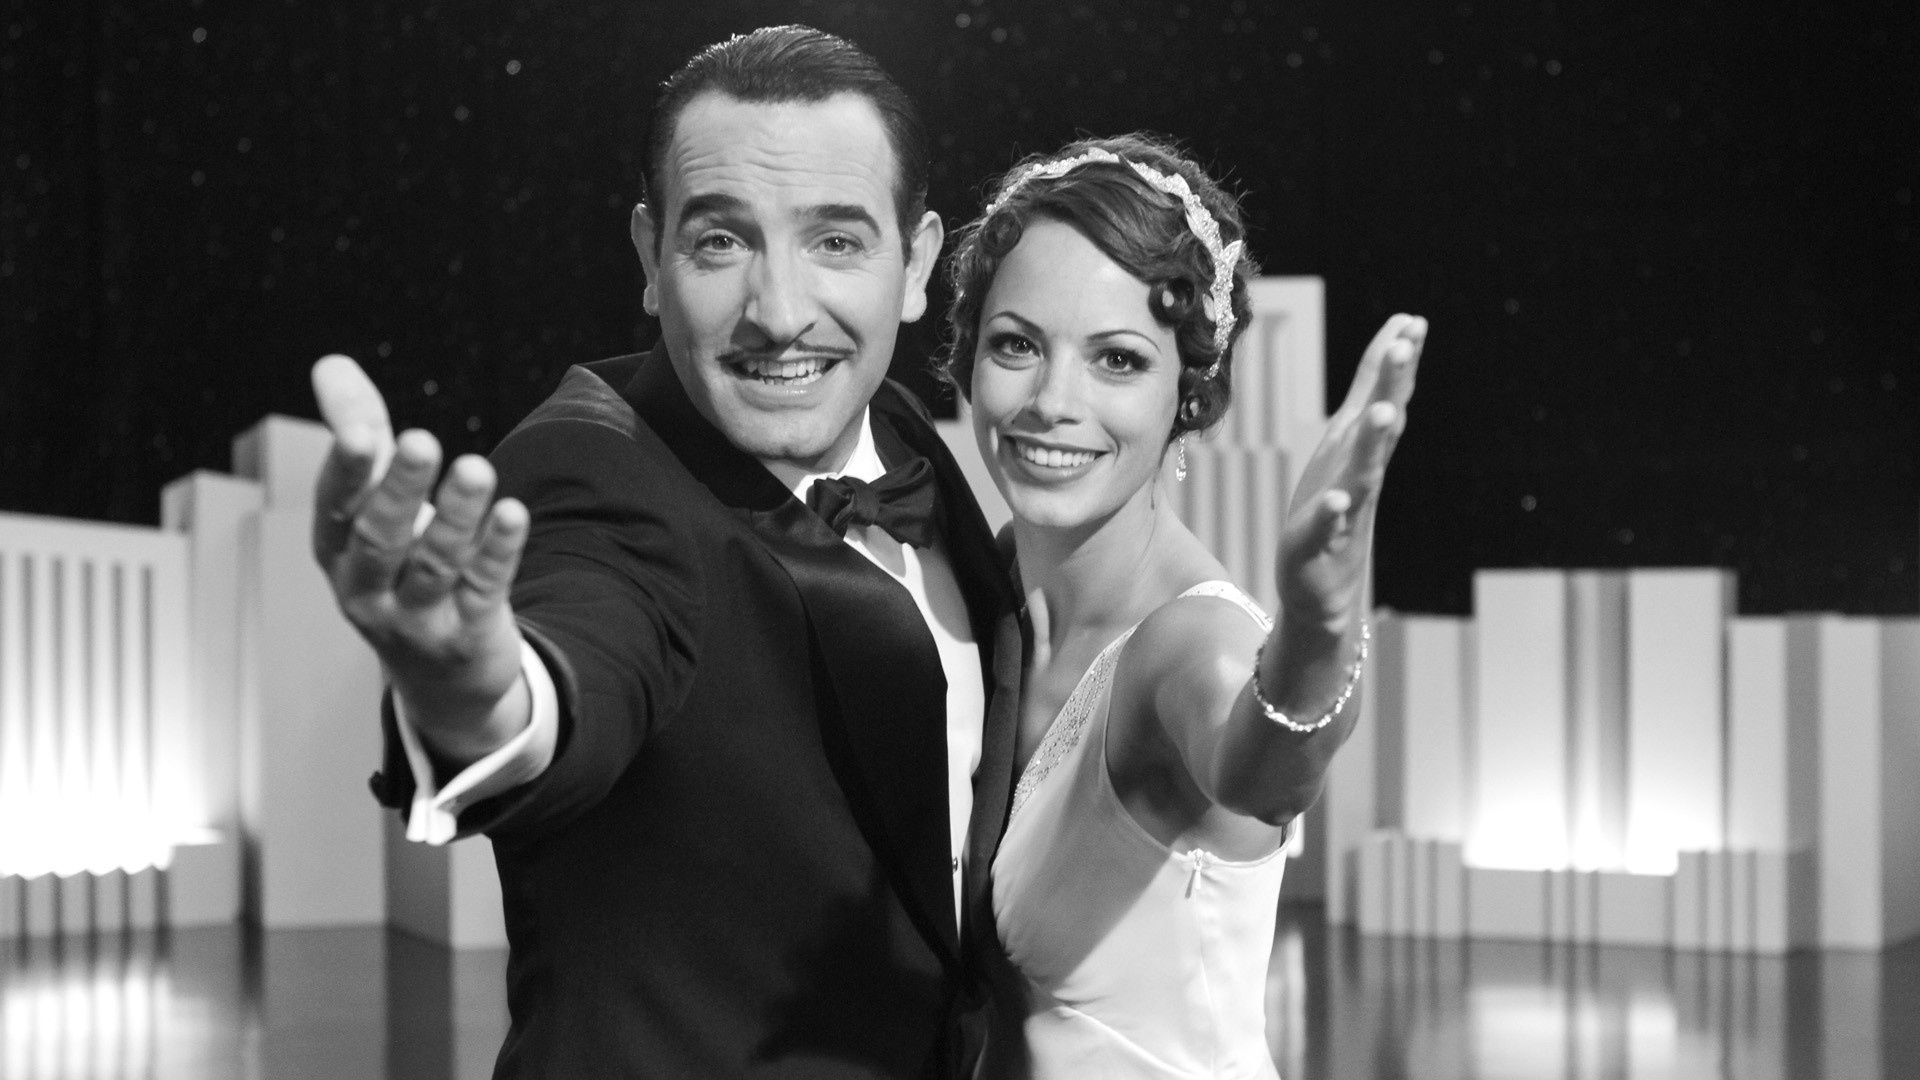 The Artist (Movie): Written and directed by Michel Hazanavicius. 1920x1080 Full HD Wallpaper.